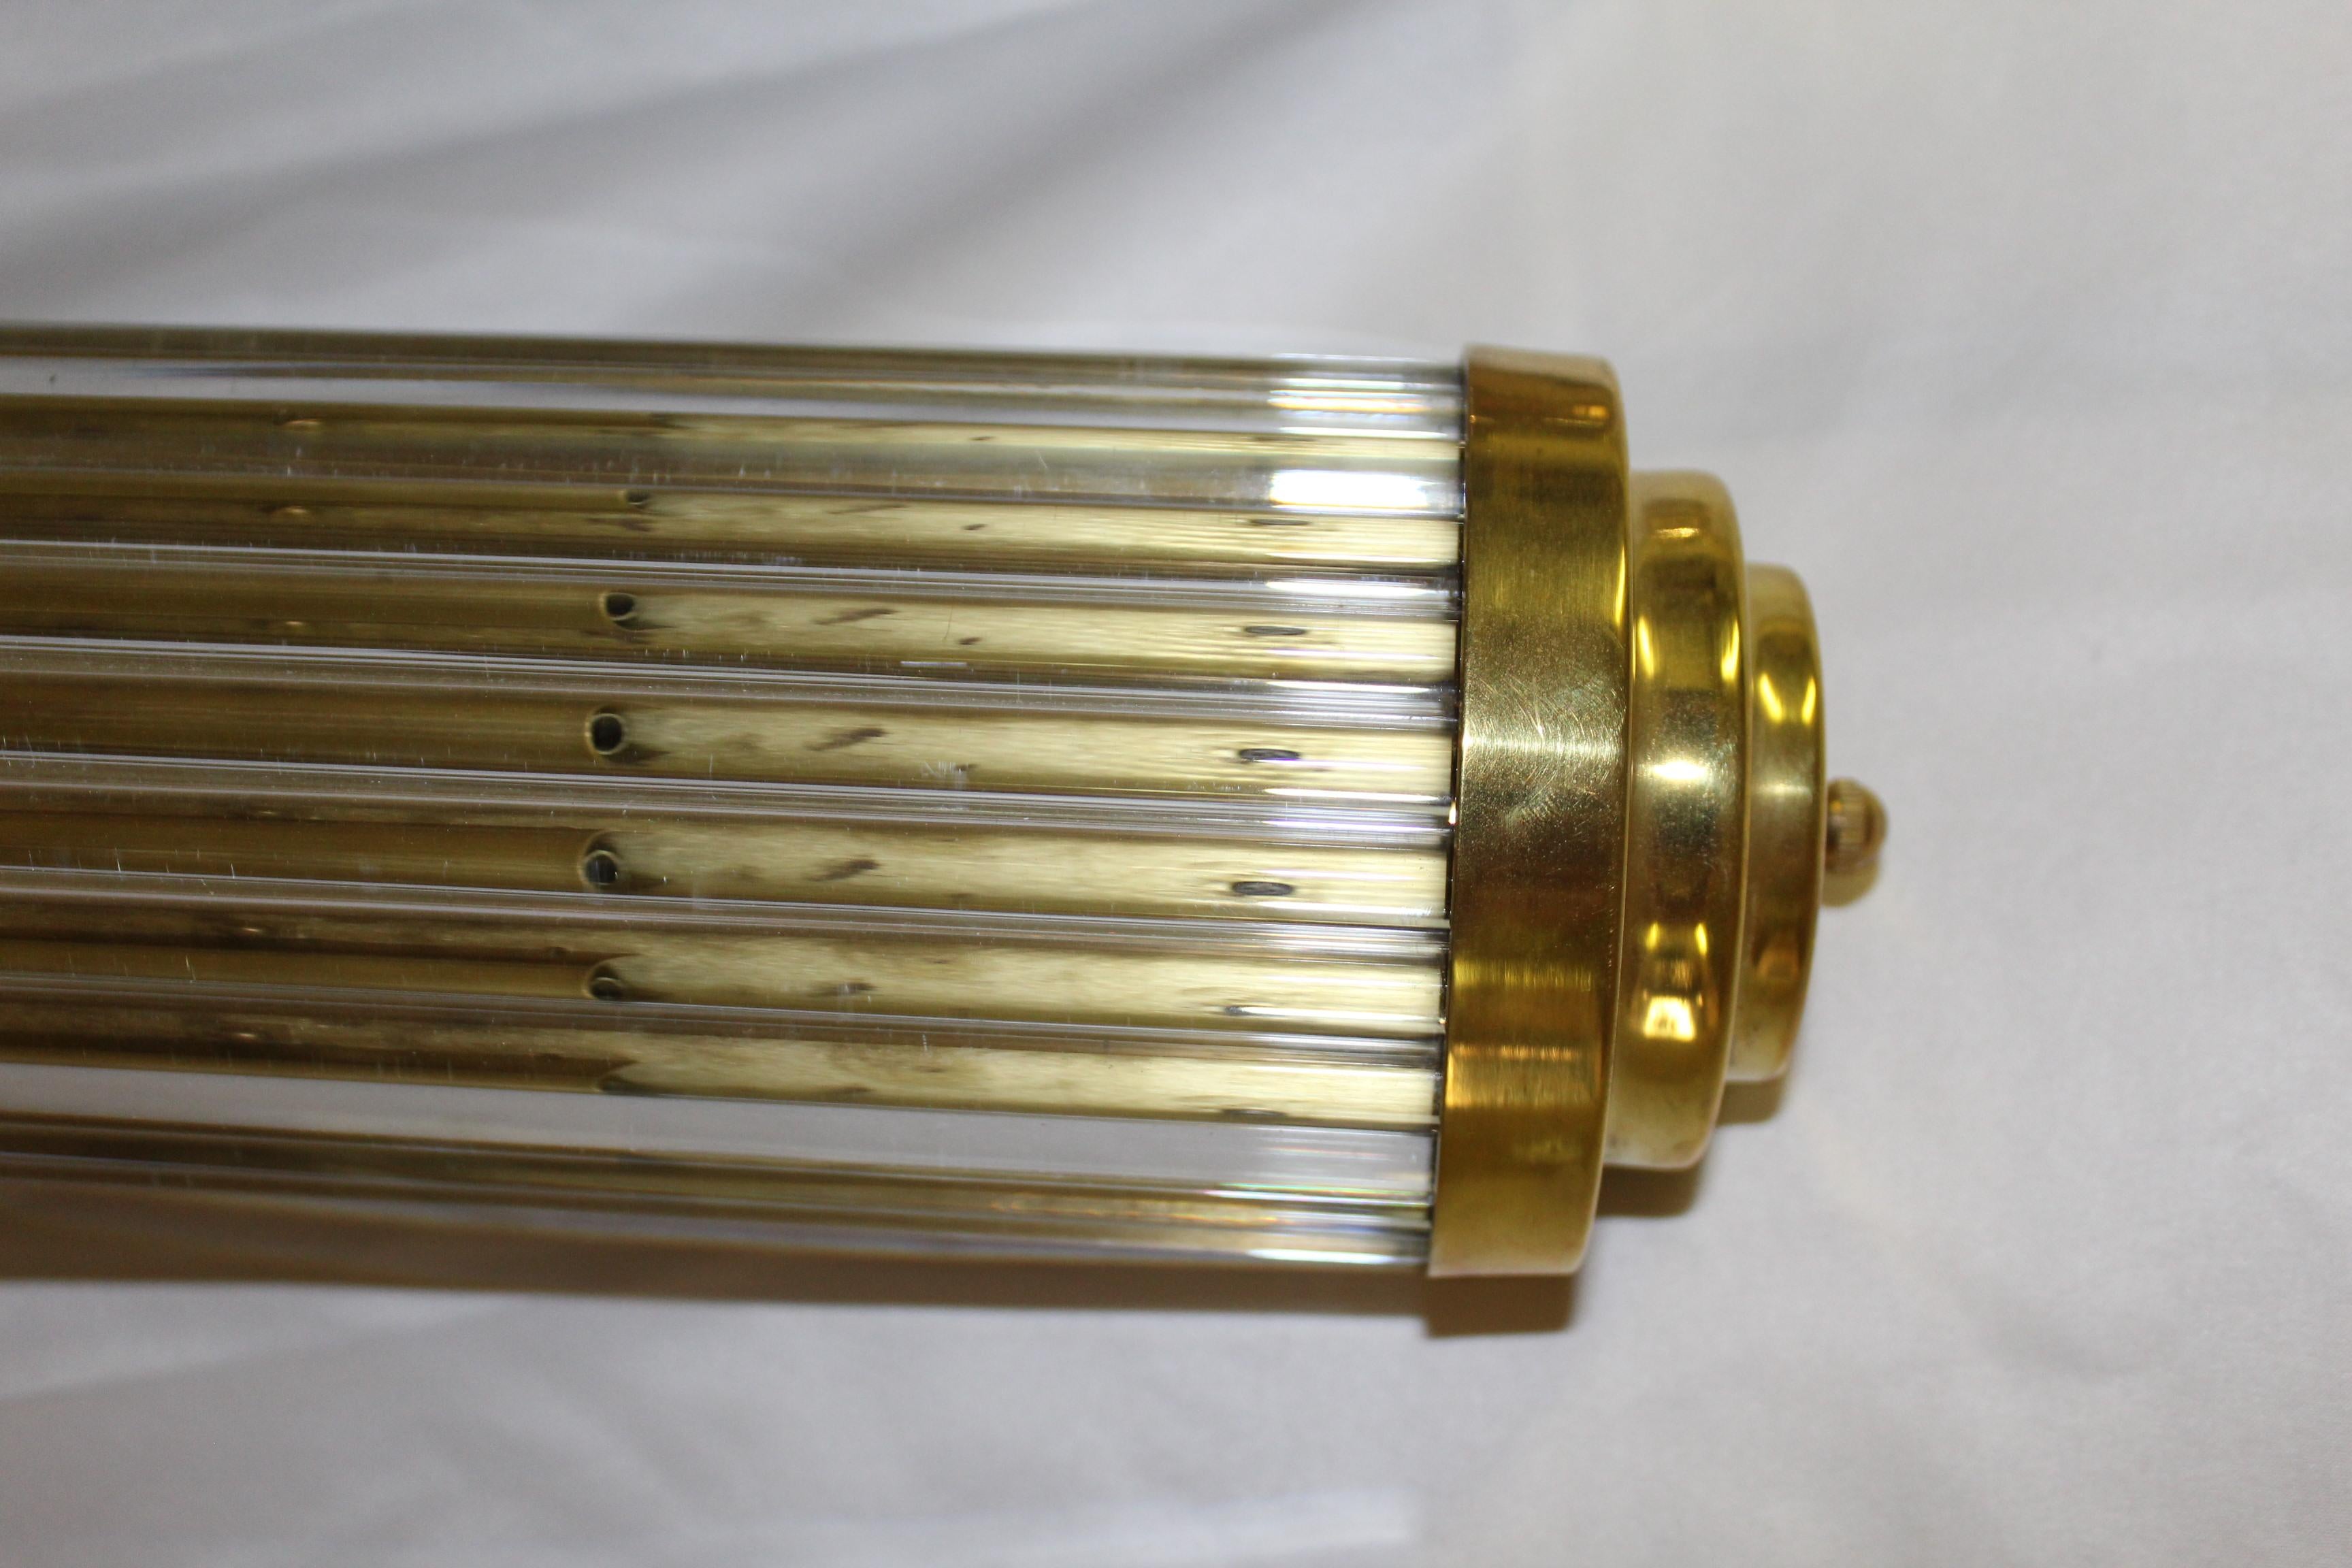 Deco sconces in solid brass metal with a hi-polished finish. handcut glass rods cut to fit. Made for a lighting showroom. Samples new/old stock. Has 4 candelabras. Can be mounted vertically or horizontally. Measures: 24 